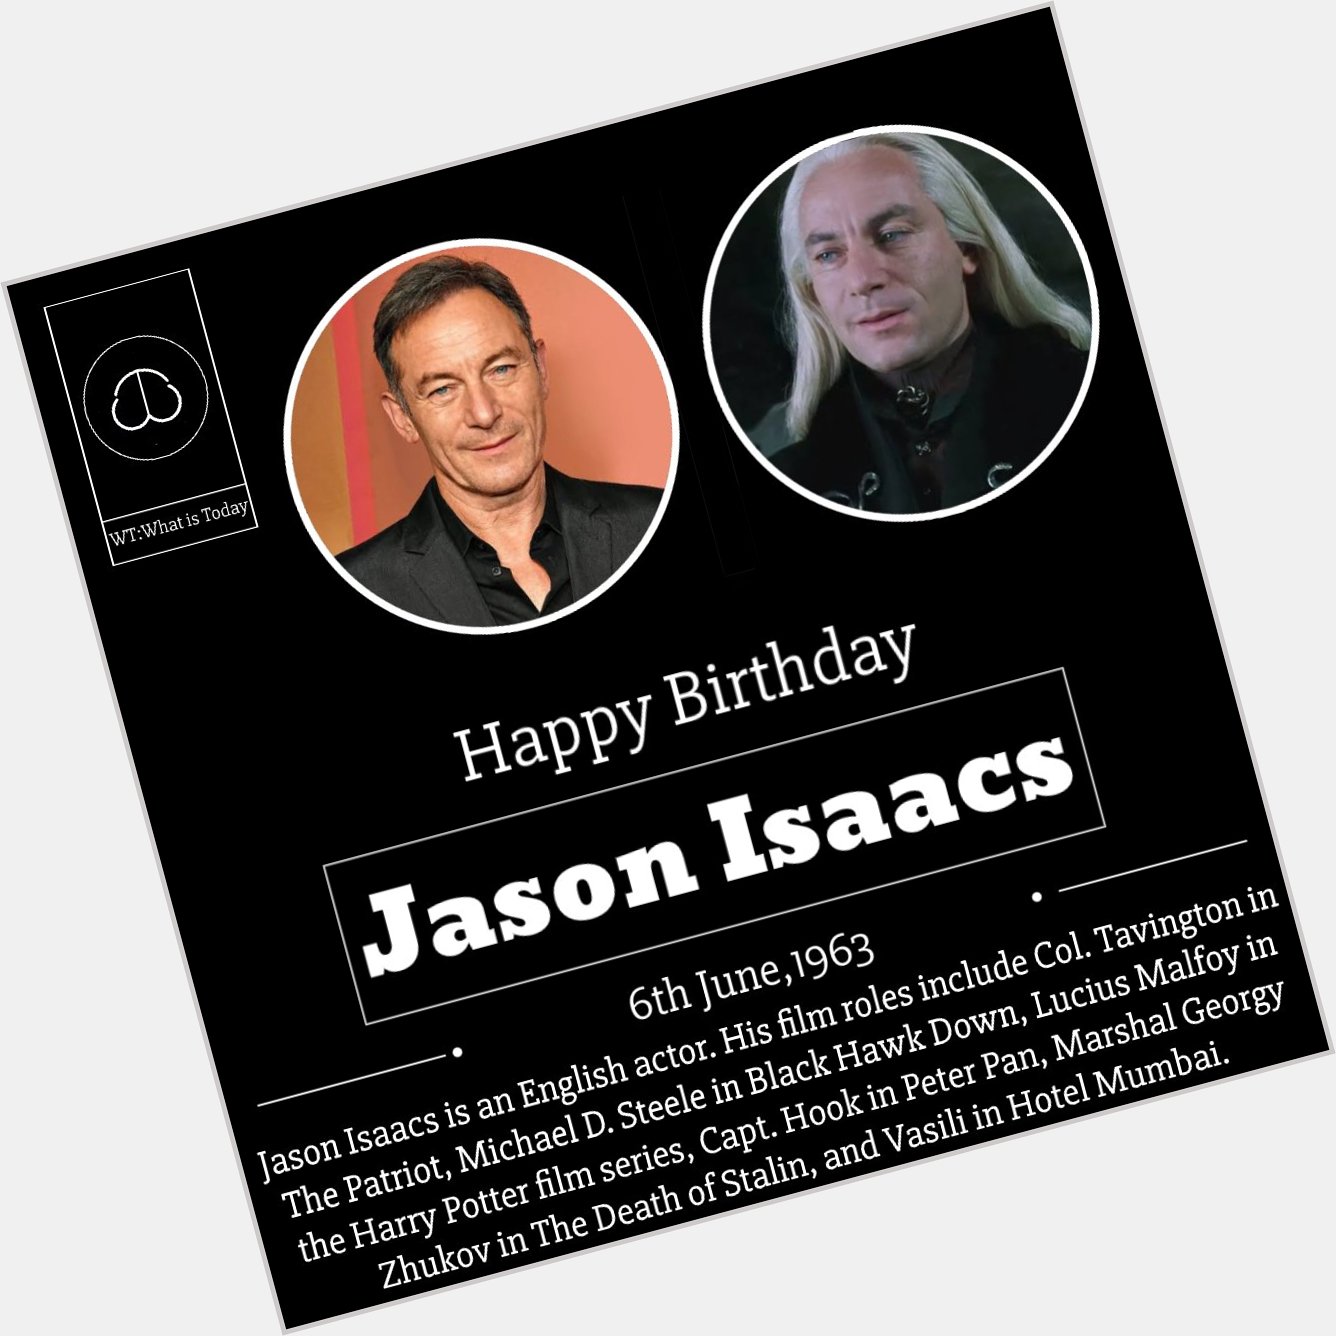 Did you remember this character in series?
Happy Birthday Jason Isaacs..! 